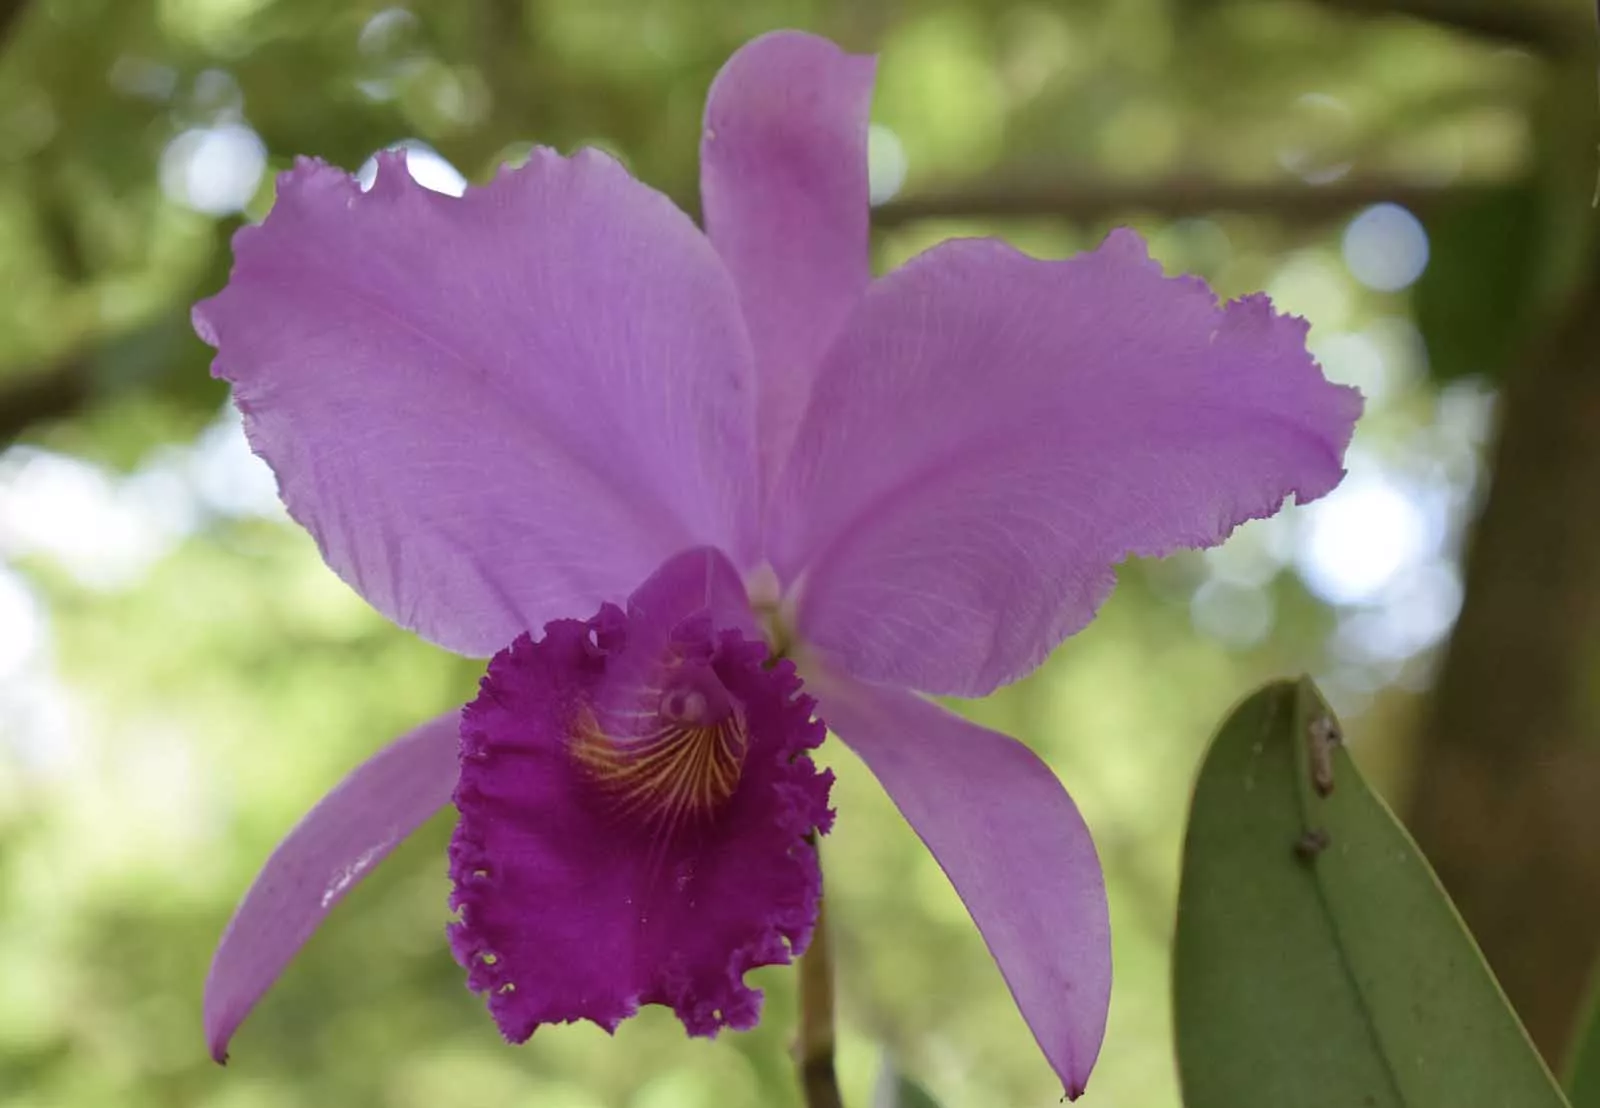 Surprising Facts About Colombia-Colombia Has More Than 4,000 Species Of Orchids